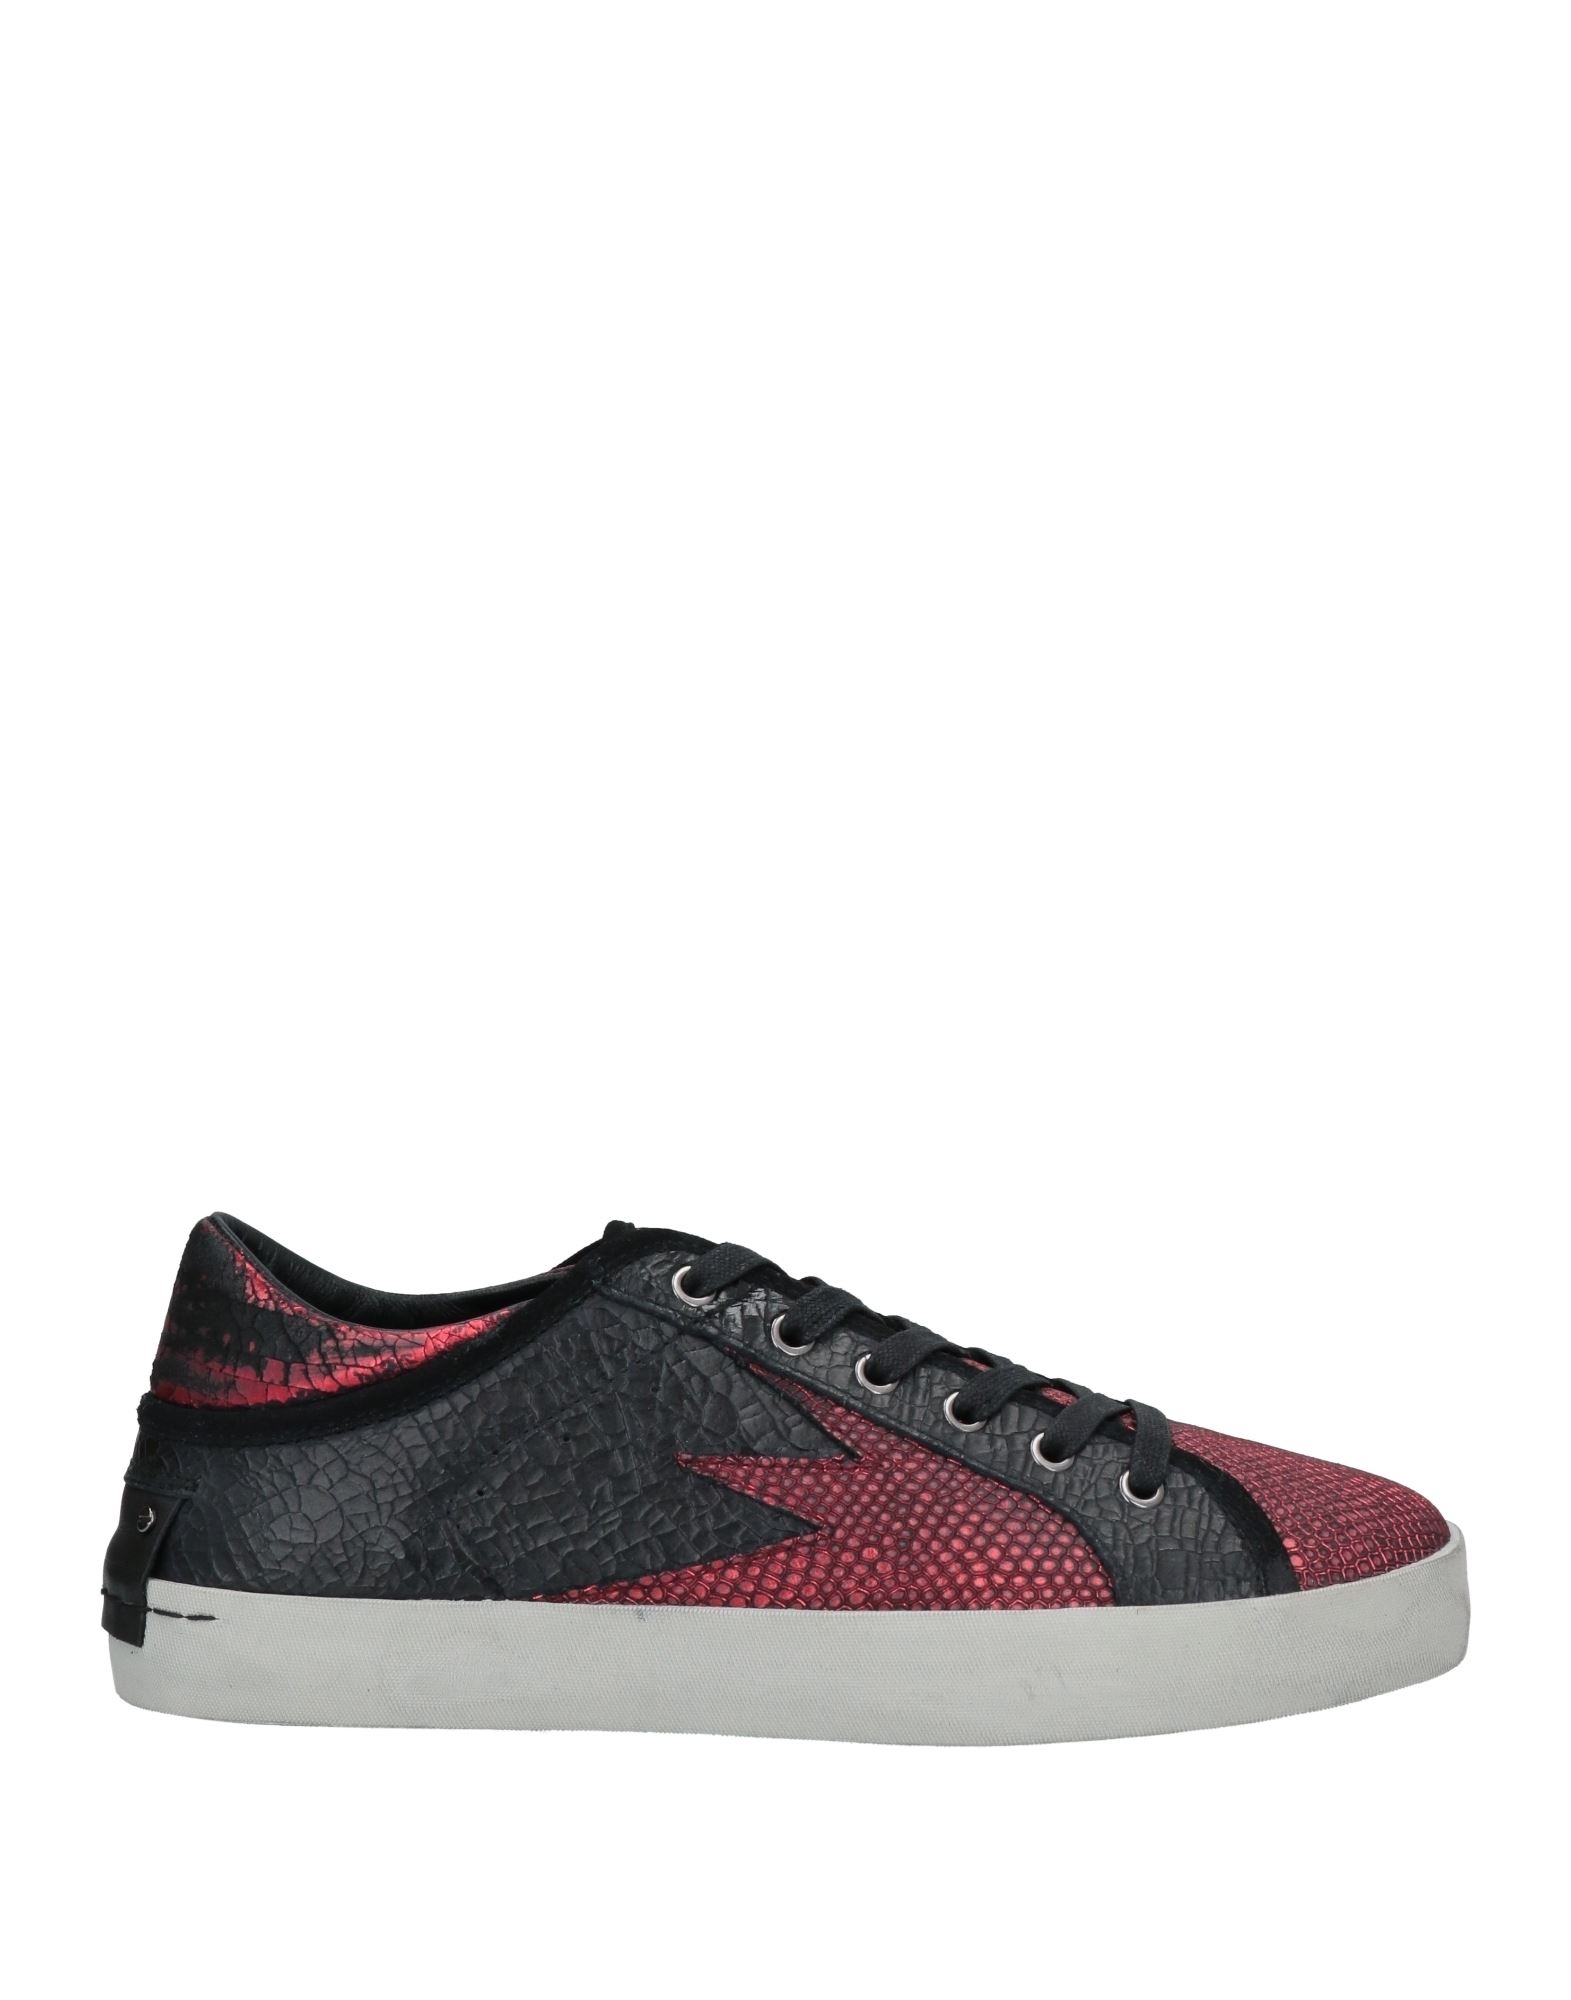 Crime London Sneakers In Red